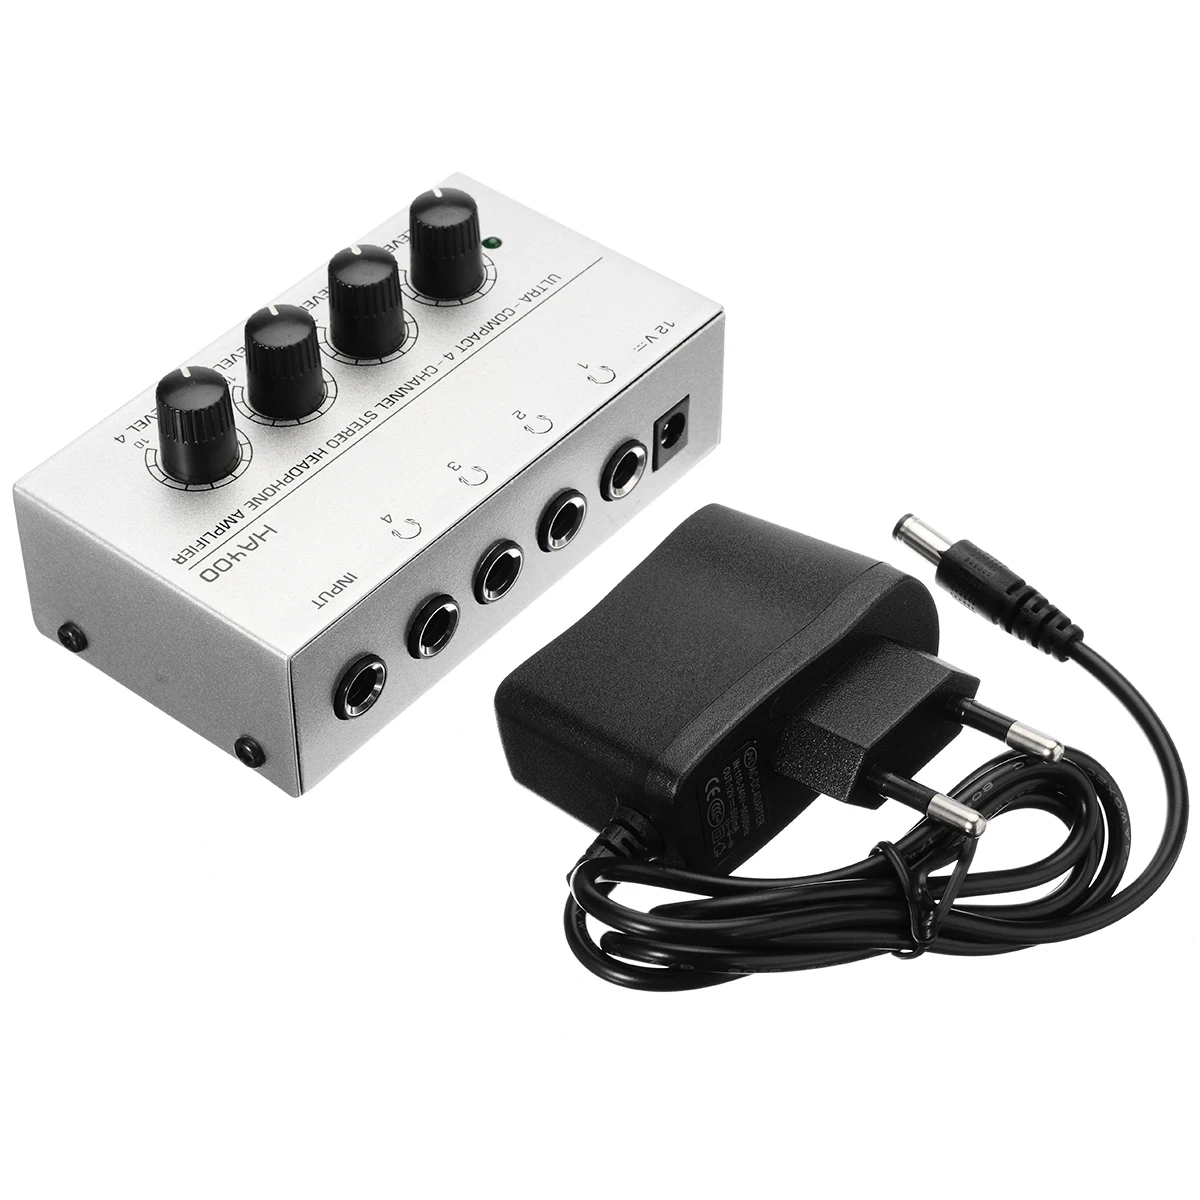 

4 Channel Headphone Amplifiers HA400 Ultra-Compact Audio Stereo Amp Microamp 4 high-power Stereo Amplifier With EU Adapter